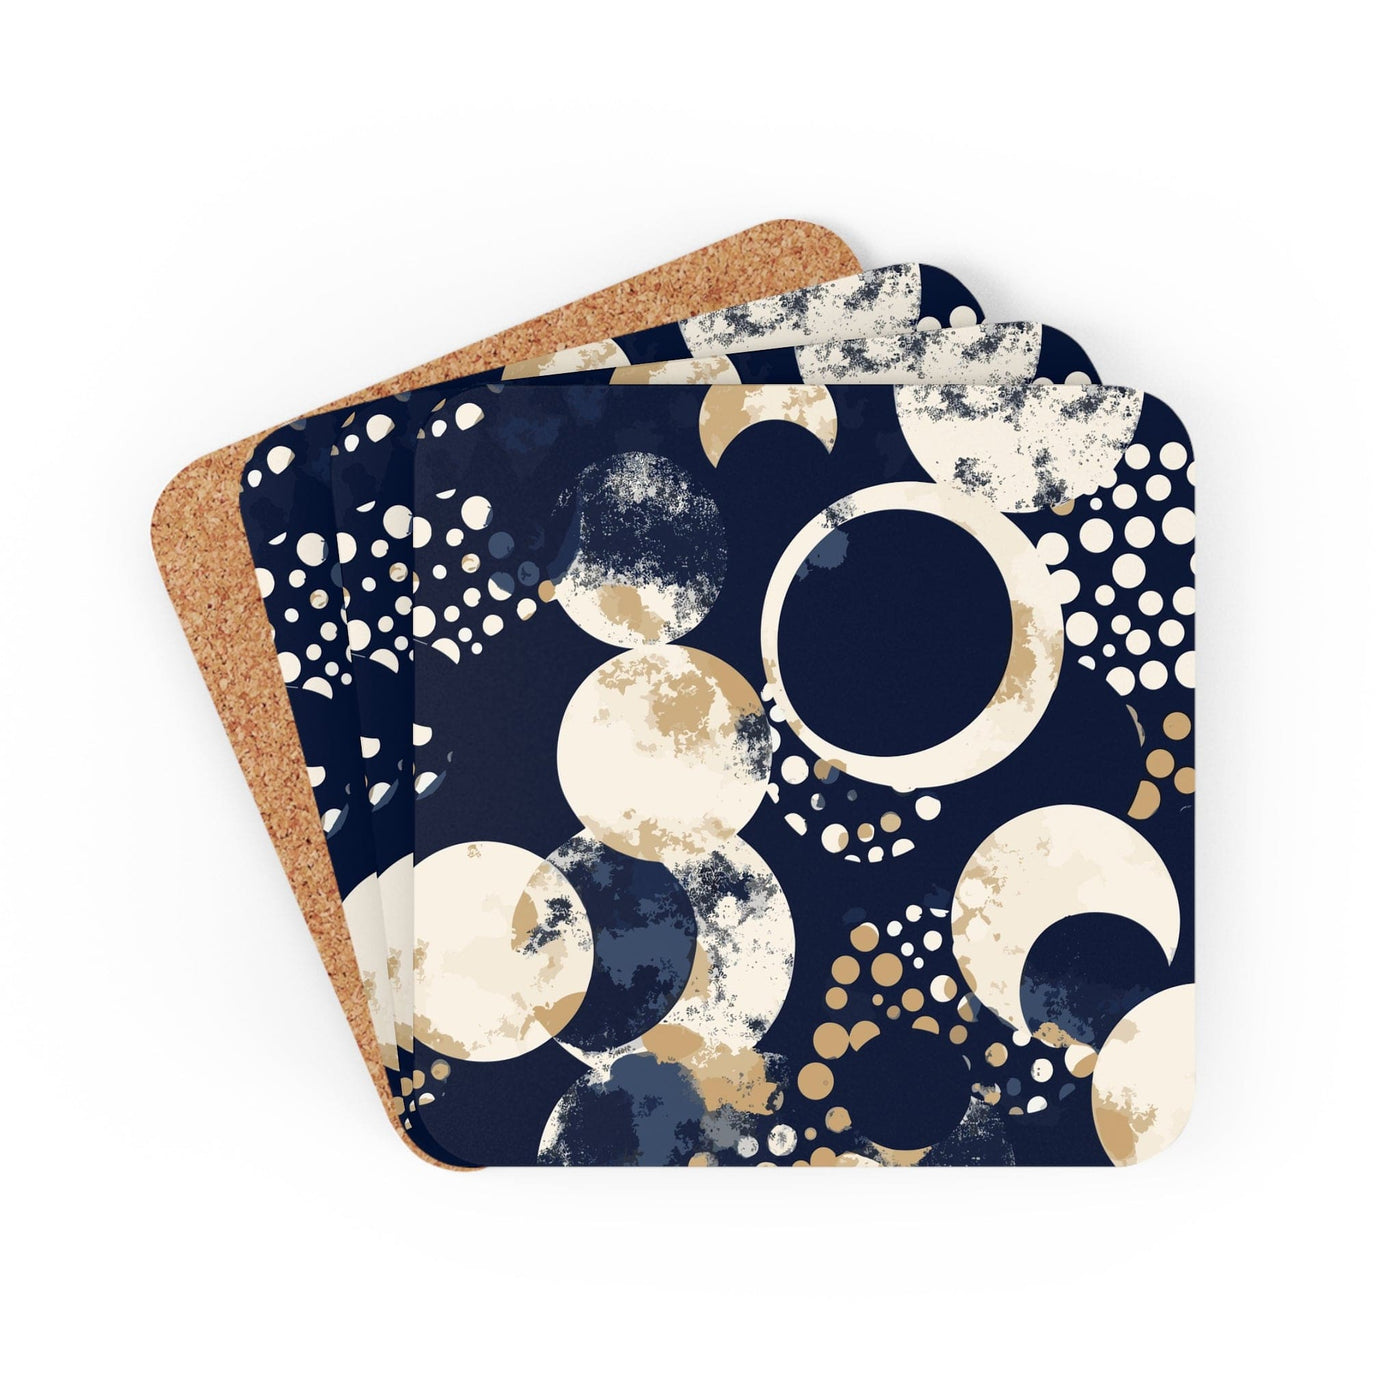 Coaster Set Of 4 For Drinks Navy Blue And Beige Spotted Illustration